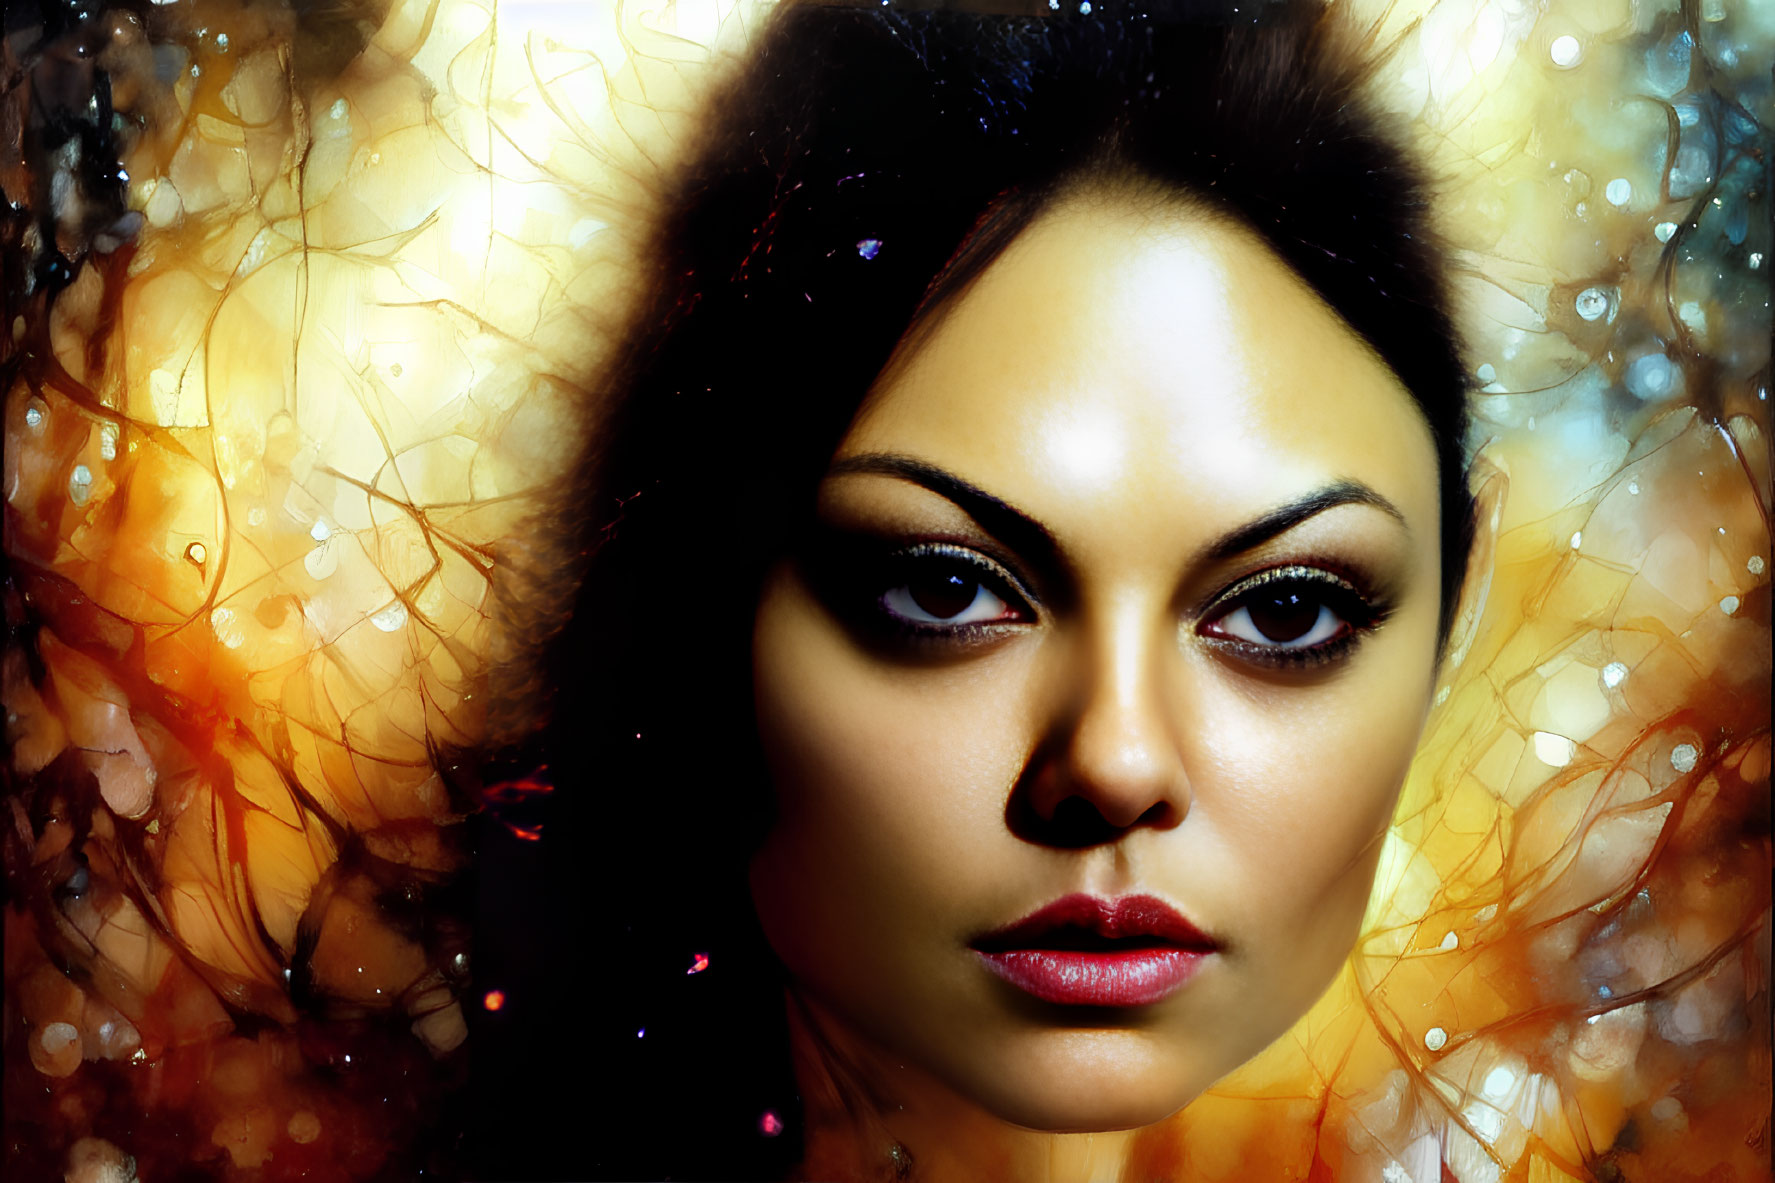 Dark-haired woman with striking eye makeup on abstract background in orange and yellow hues.